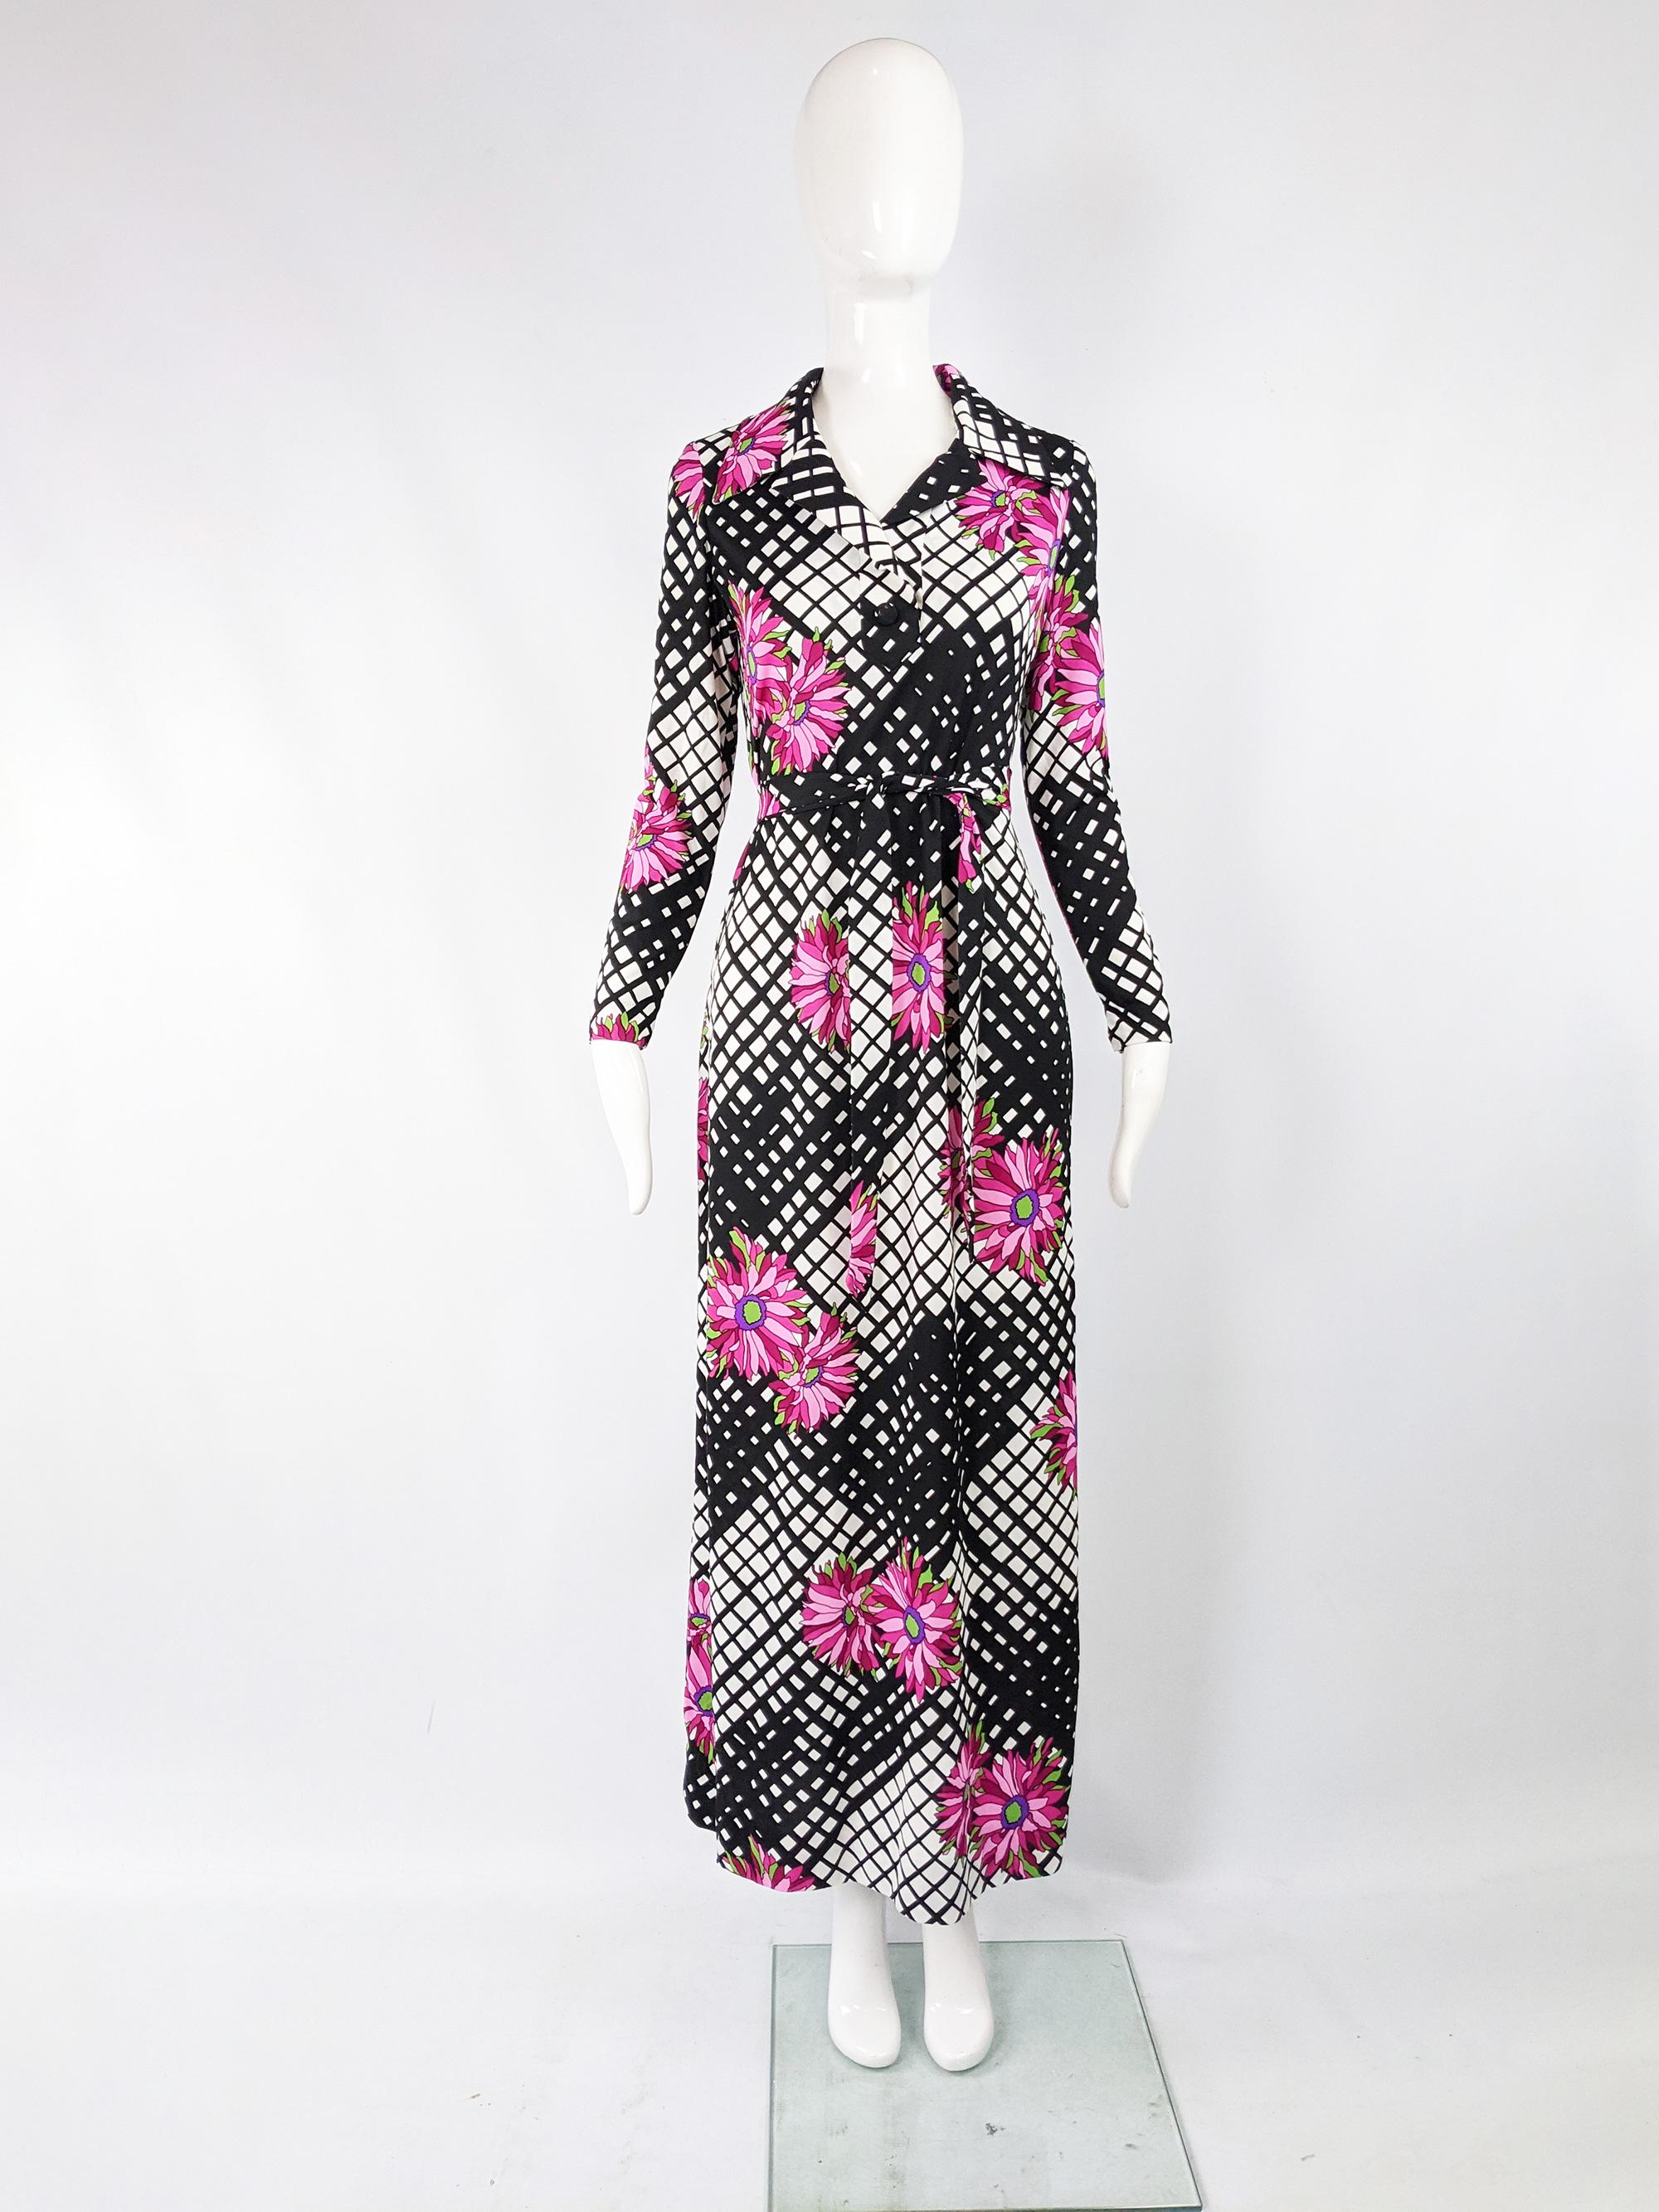 A beautiful vintage maxi dress from the 70s in a black and white synthetic jersey with a bold pink floral print. It has long sleeves and a wide collar. 

Size: Unlabelled; fits like a UK 12/ US 8/ EU 40. Please check measurements. 
Bust - 36” /